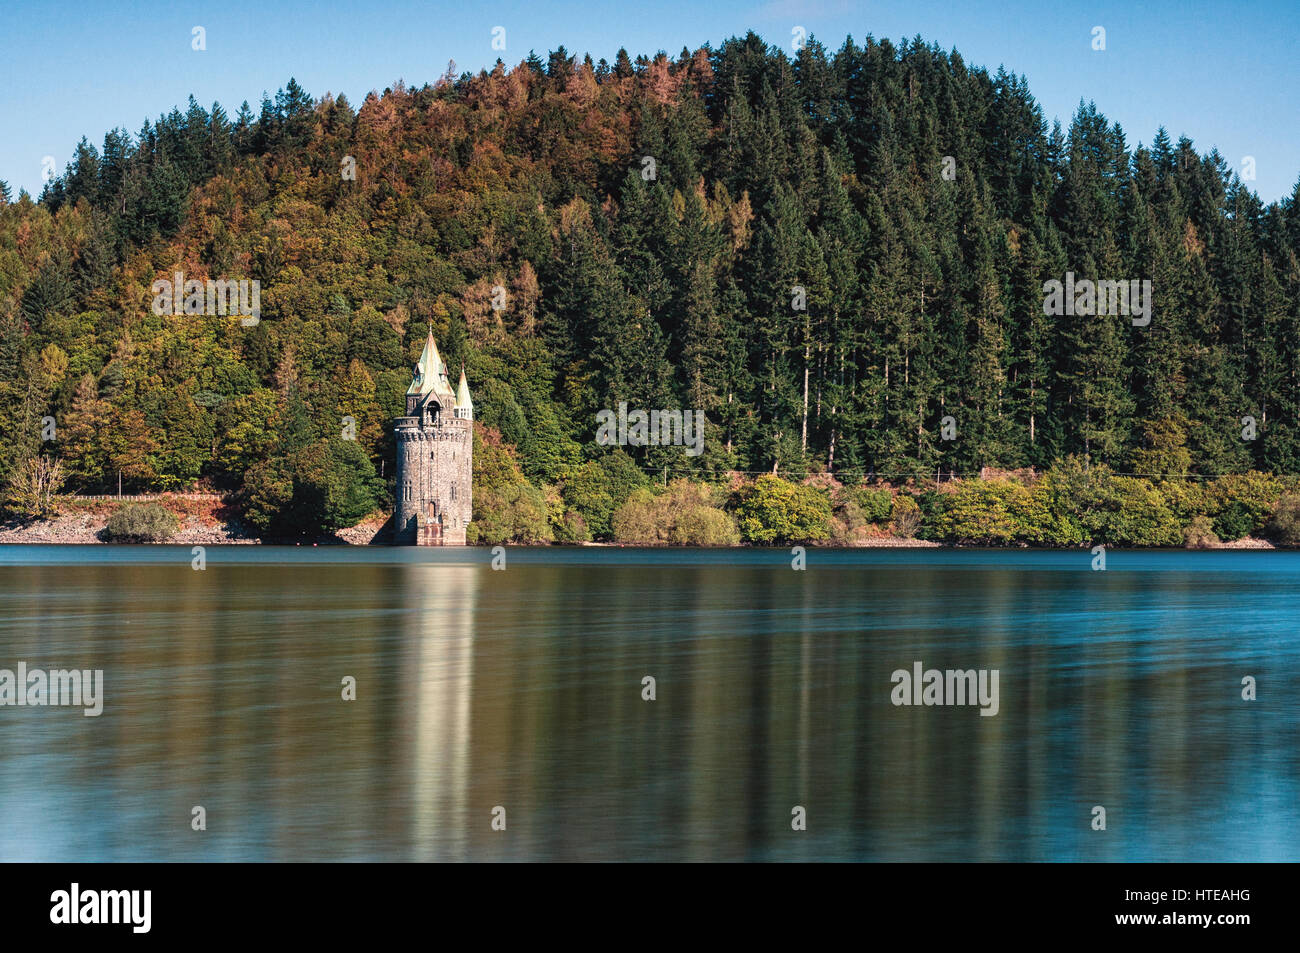 Lake Vyrnwy Straining Tower with trees behind during Autumn, Wales, United Kingdom Stock Photo